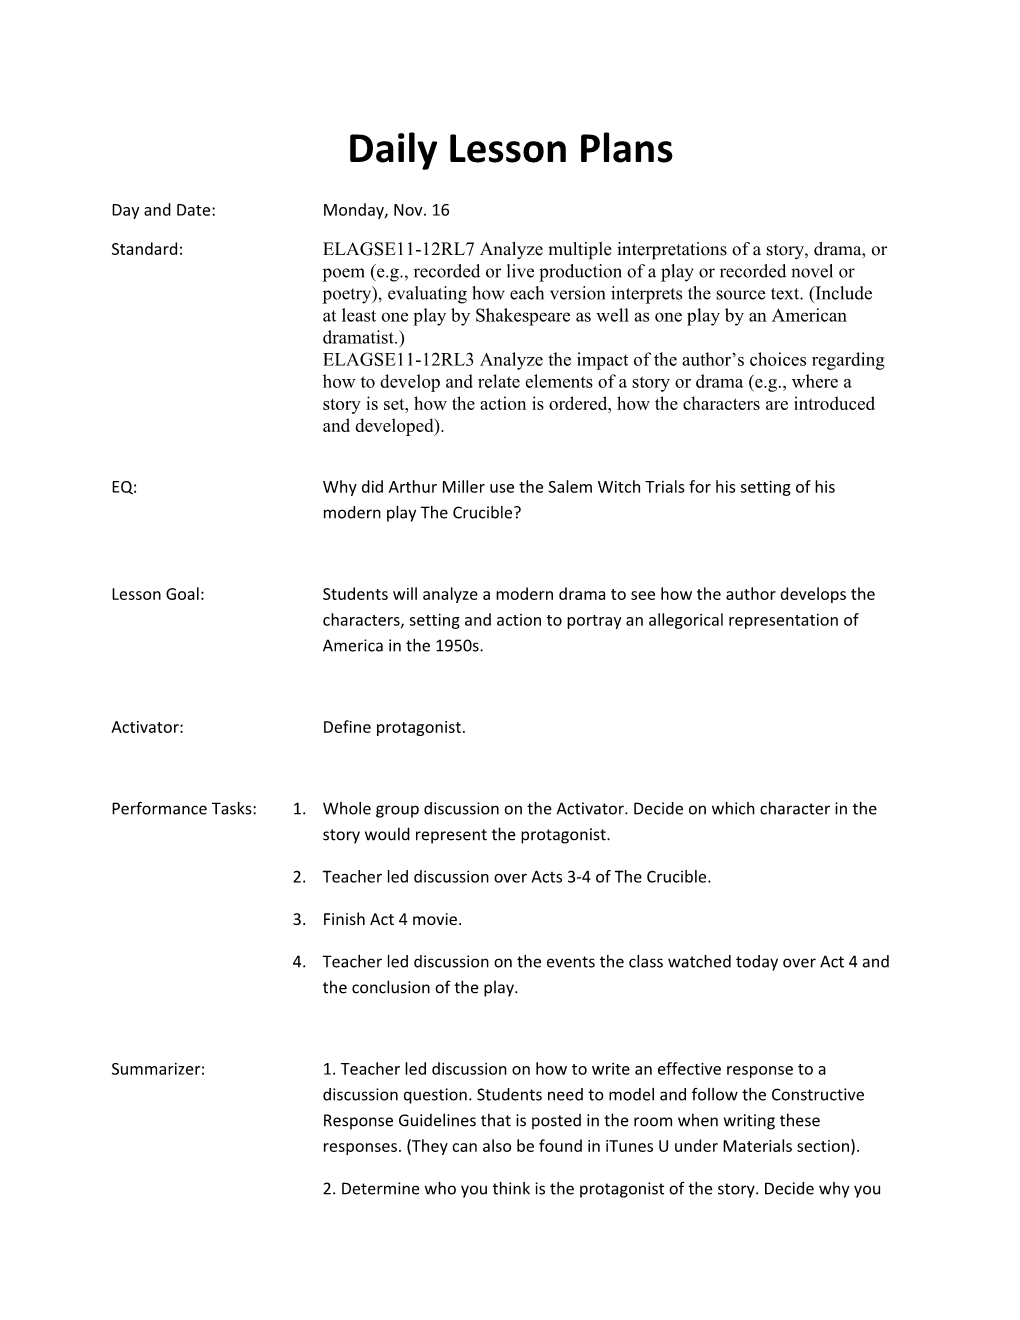 Daily Lesson Plans s2